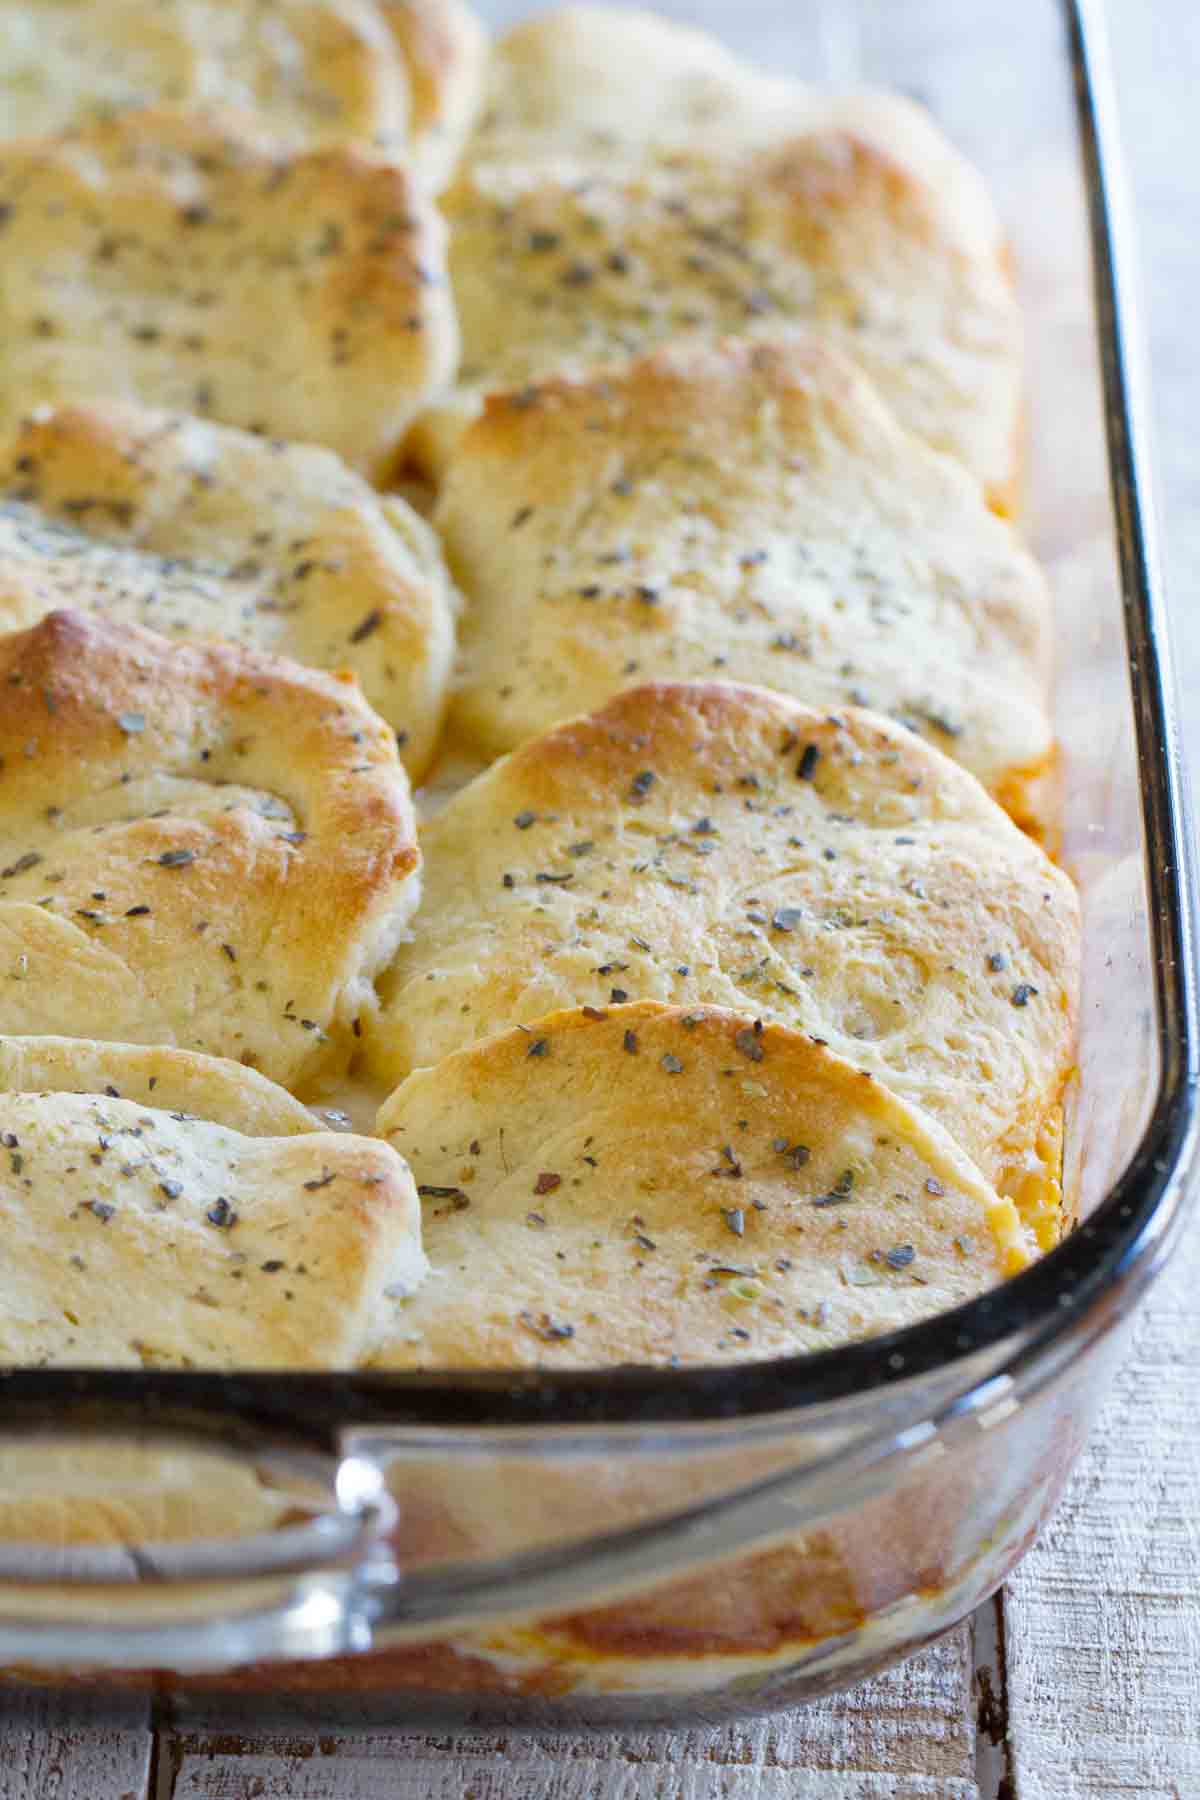 Italian Ground Beef Casserole with Biscuit Topping in a baking dish